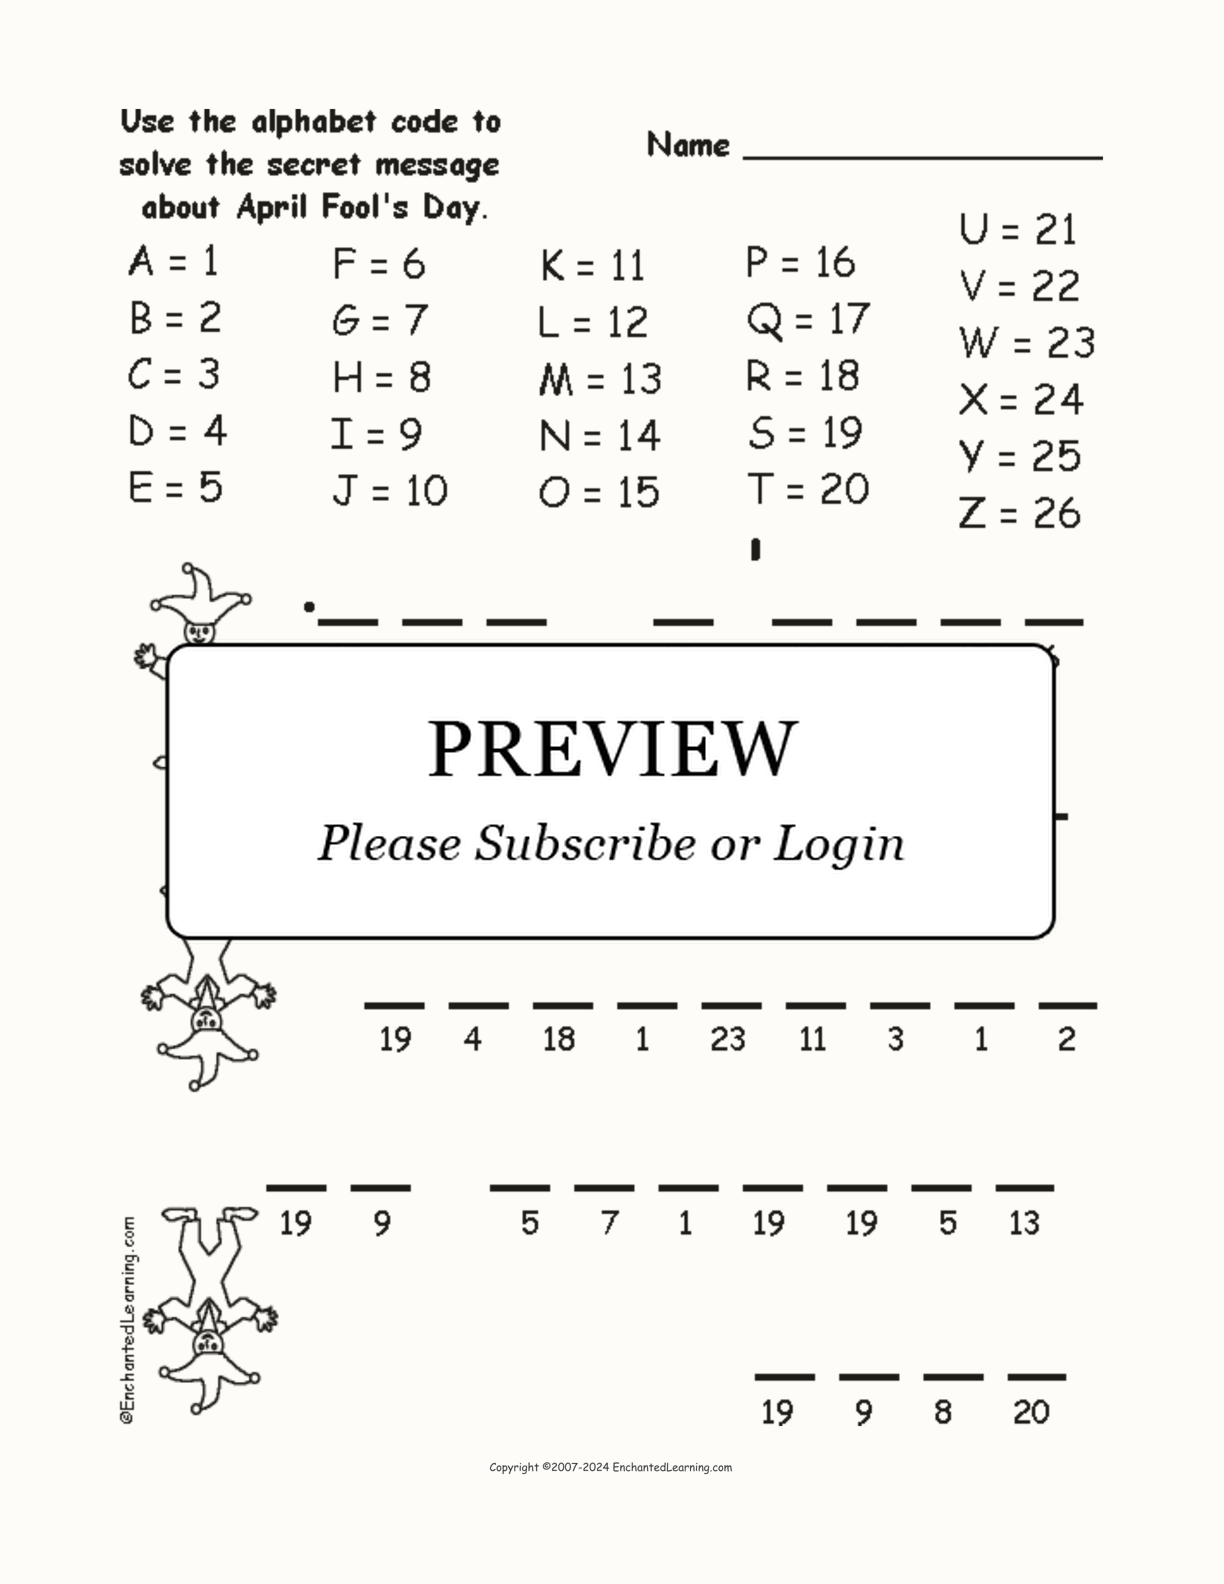 April Fool's Day Alphabet Code interactive worksheet page 1